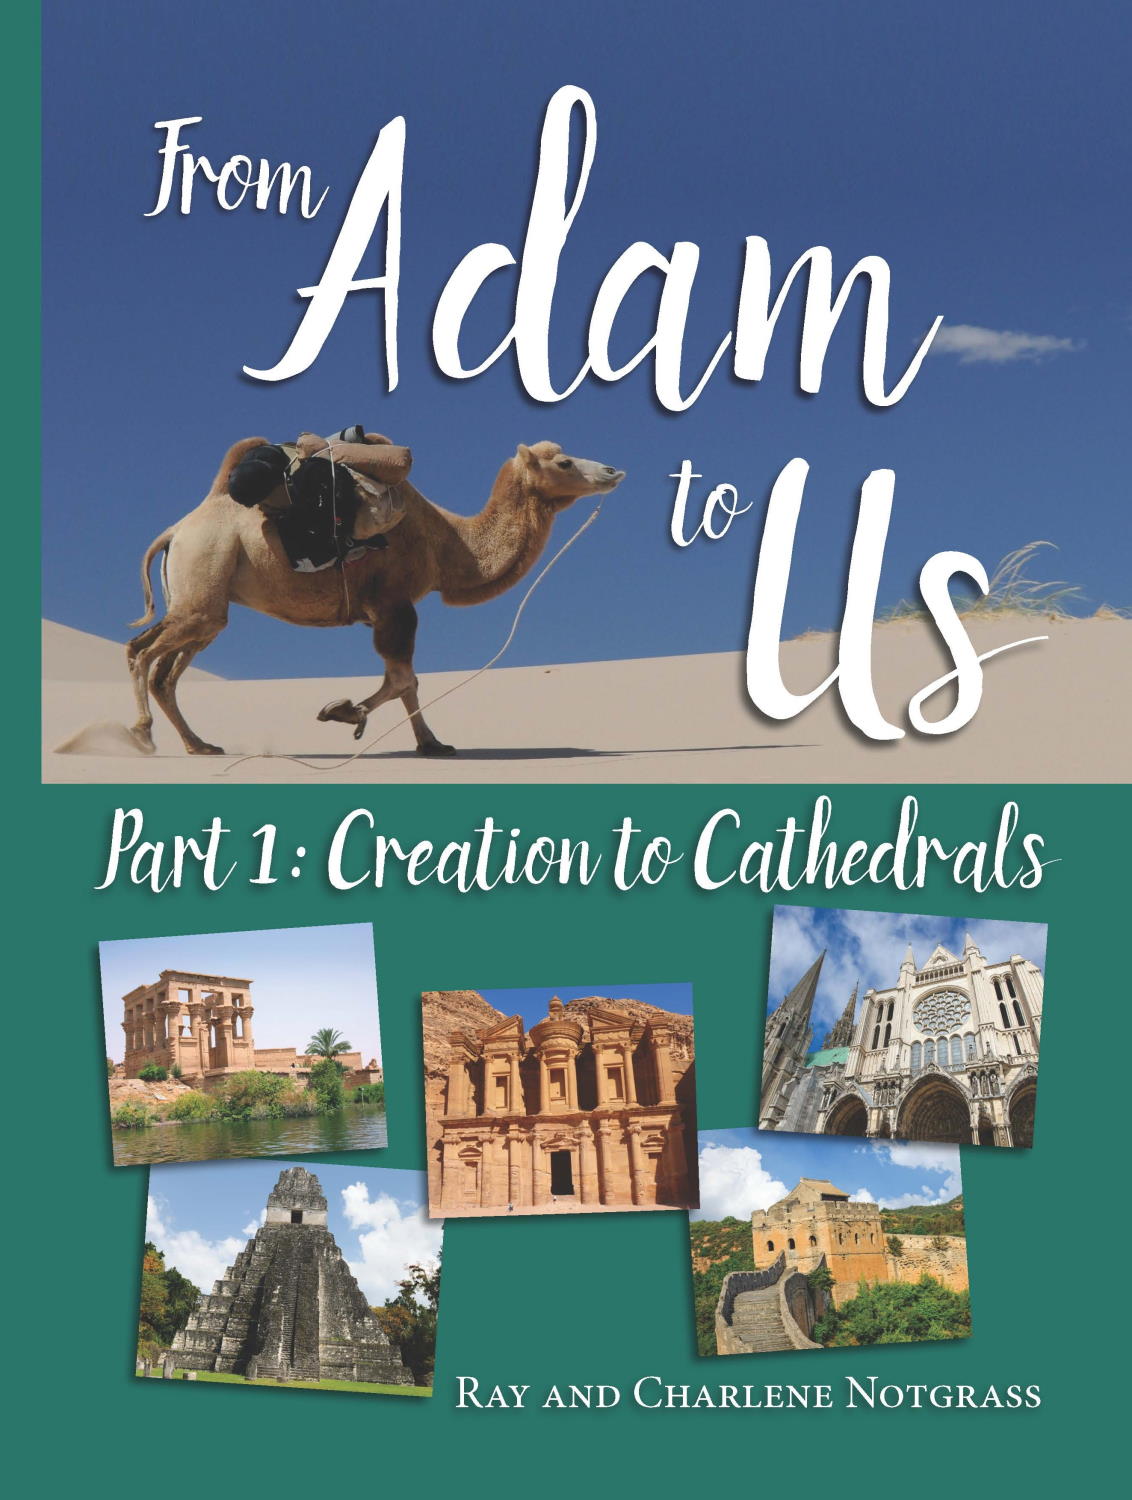 From Adam to Us Part 1: Creation to Cathedrals